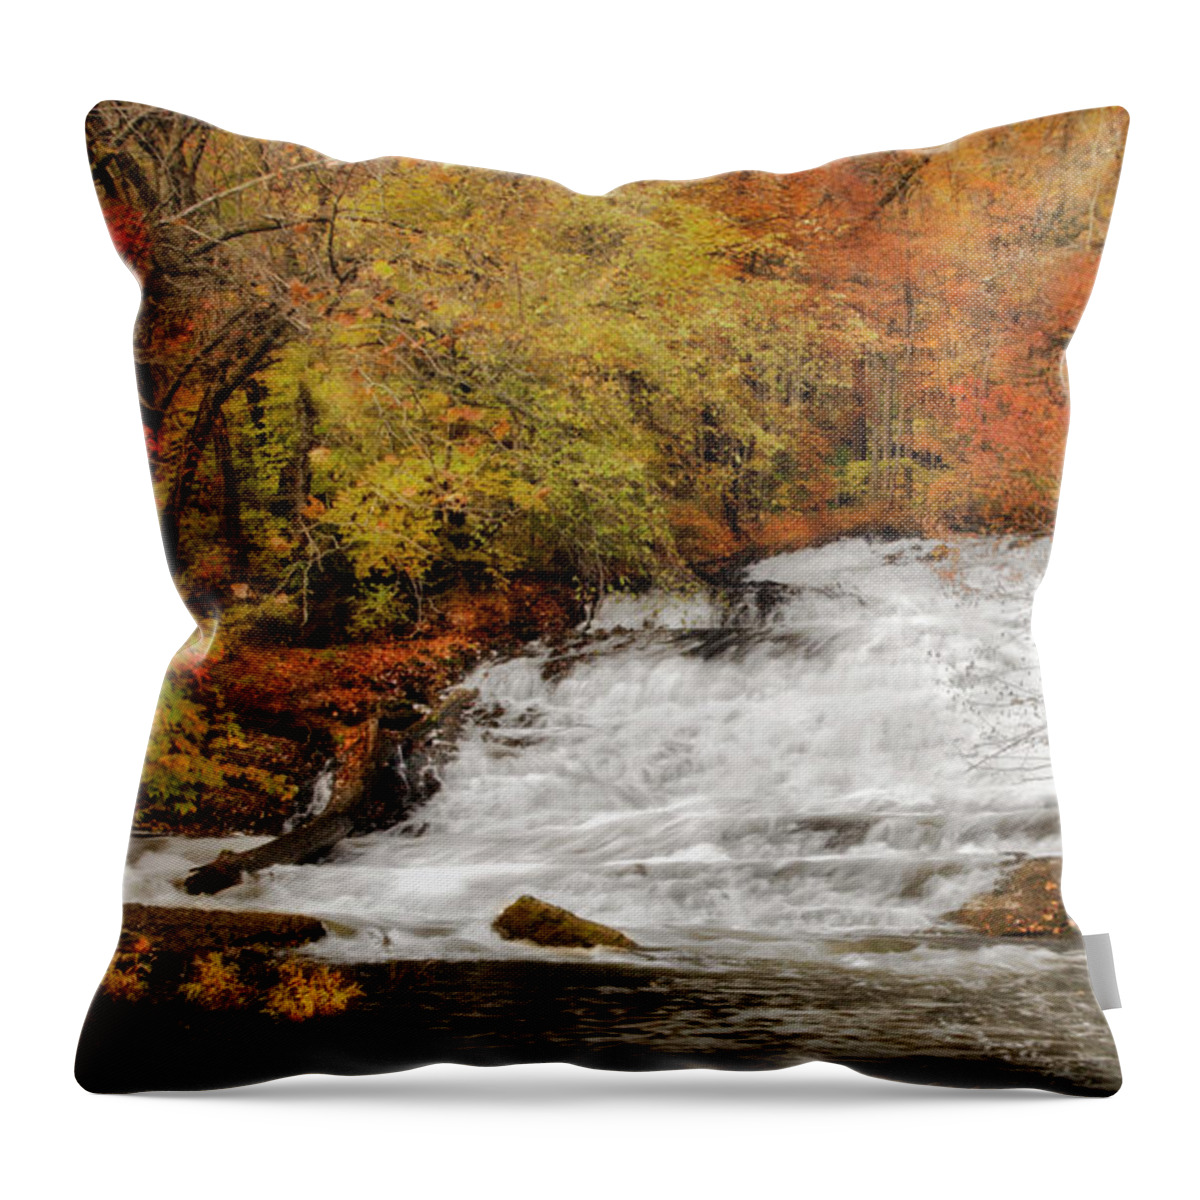 Waterfall Throw Pillow featuring the photograph Natures Fall Waterfalls by Susan Candelario